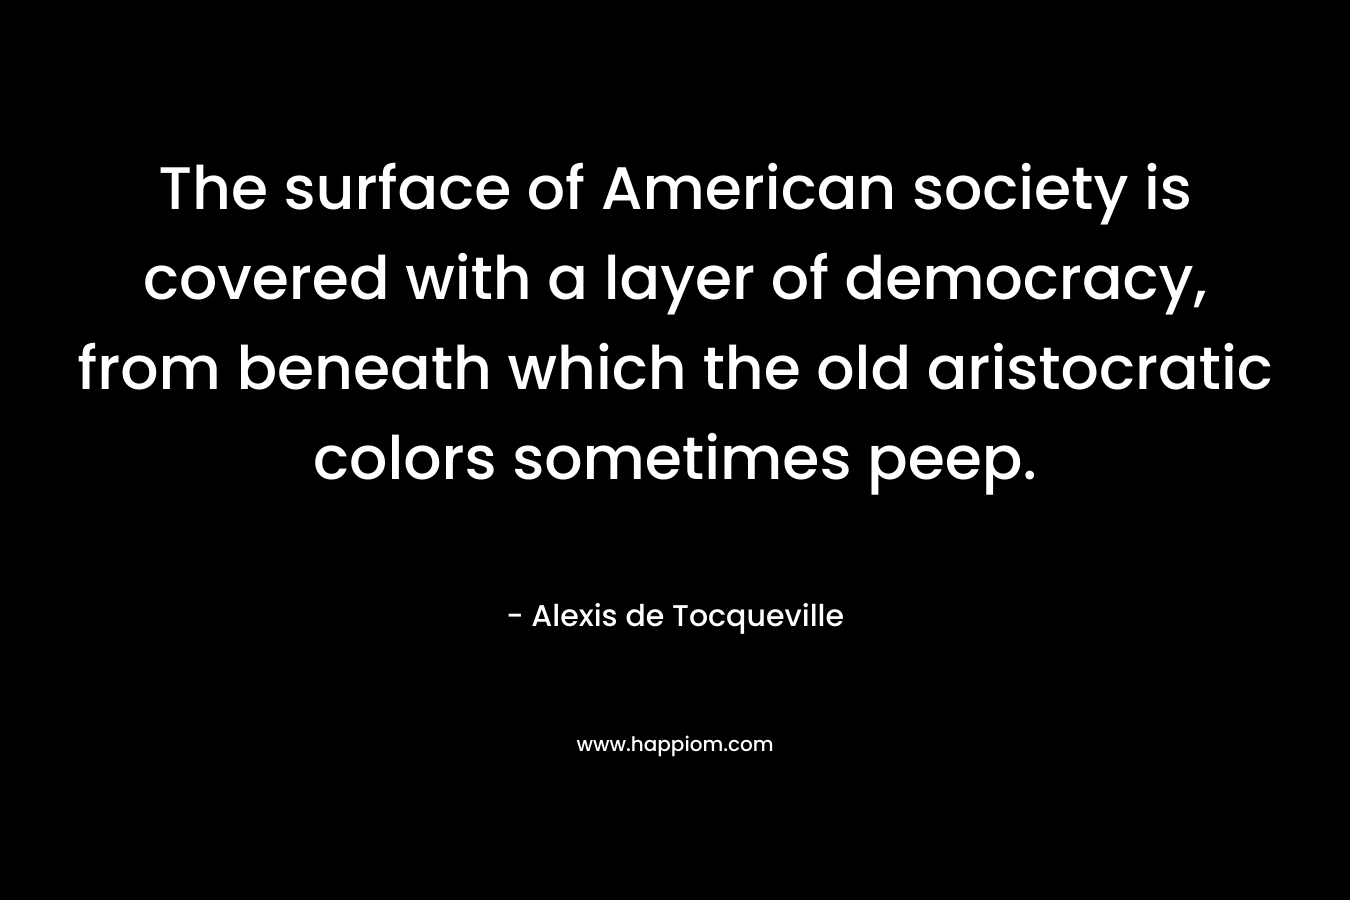 The surface of American society is covered with a layer of democracy, from beneath which the old aristocratic colors sometimes peep.